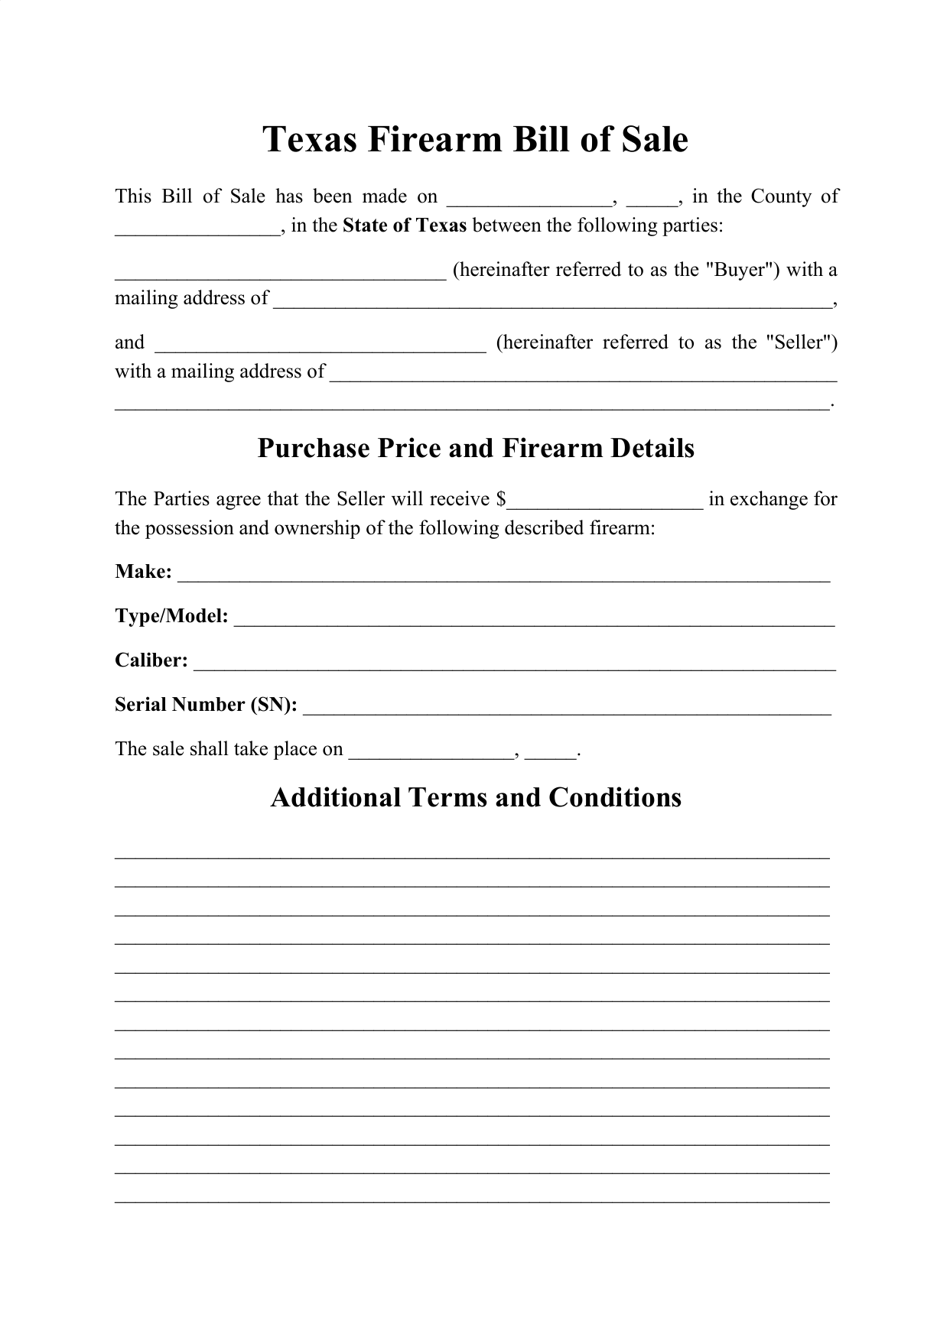 texas-firearm-bill-of-sale-form-fill-out-sign-online-and-download